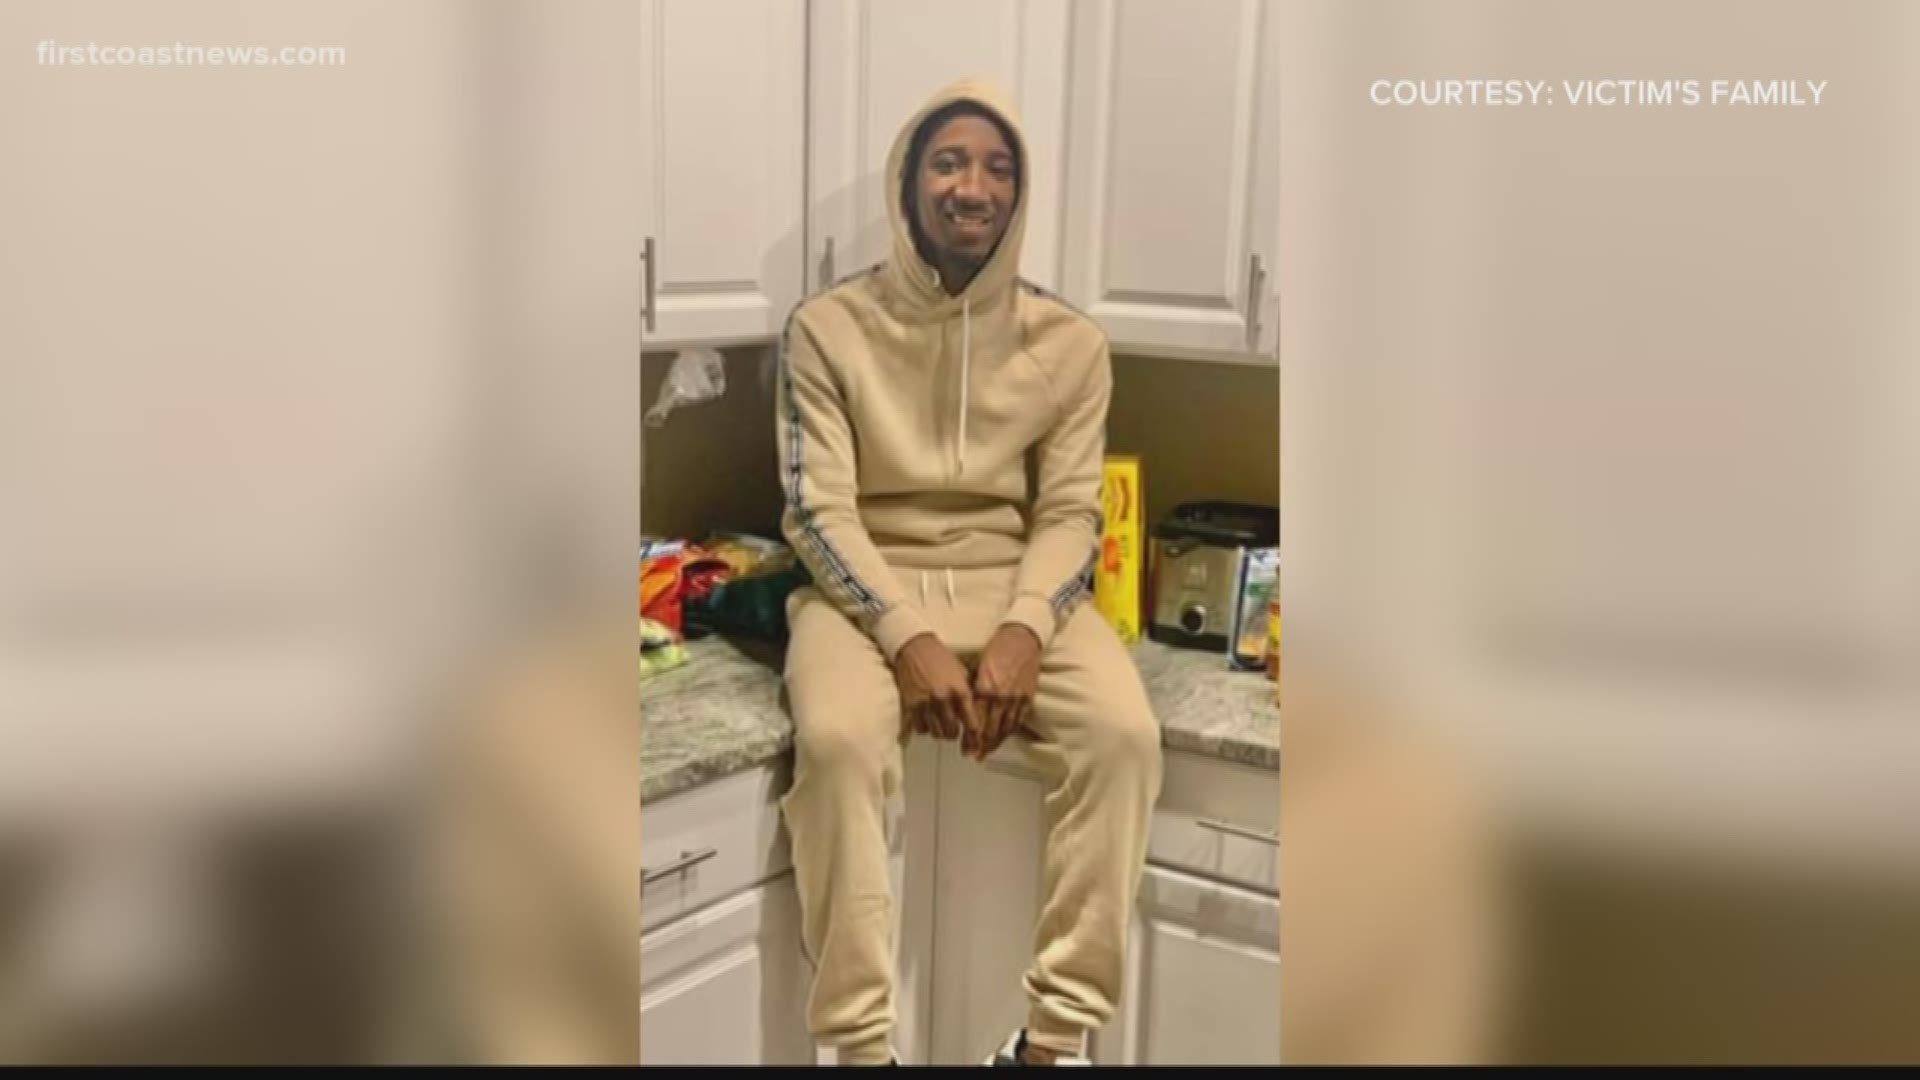 Police have not confirmed the victim's identity, but friends of the victim are telling First Coast News a 25-year-old man named Tavoris Pratt was shot and killed.